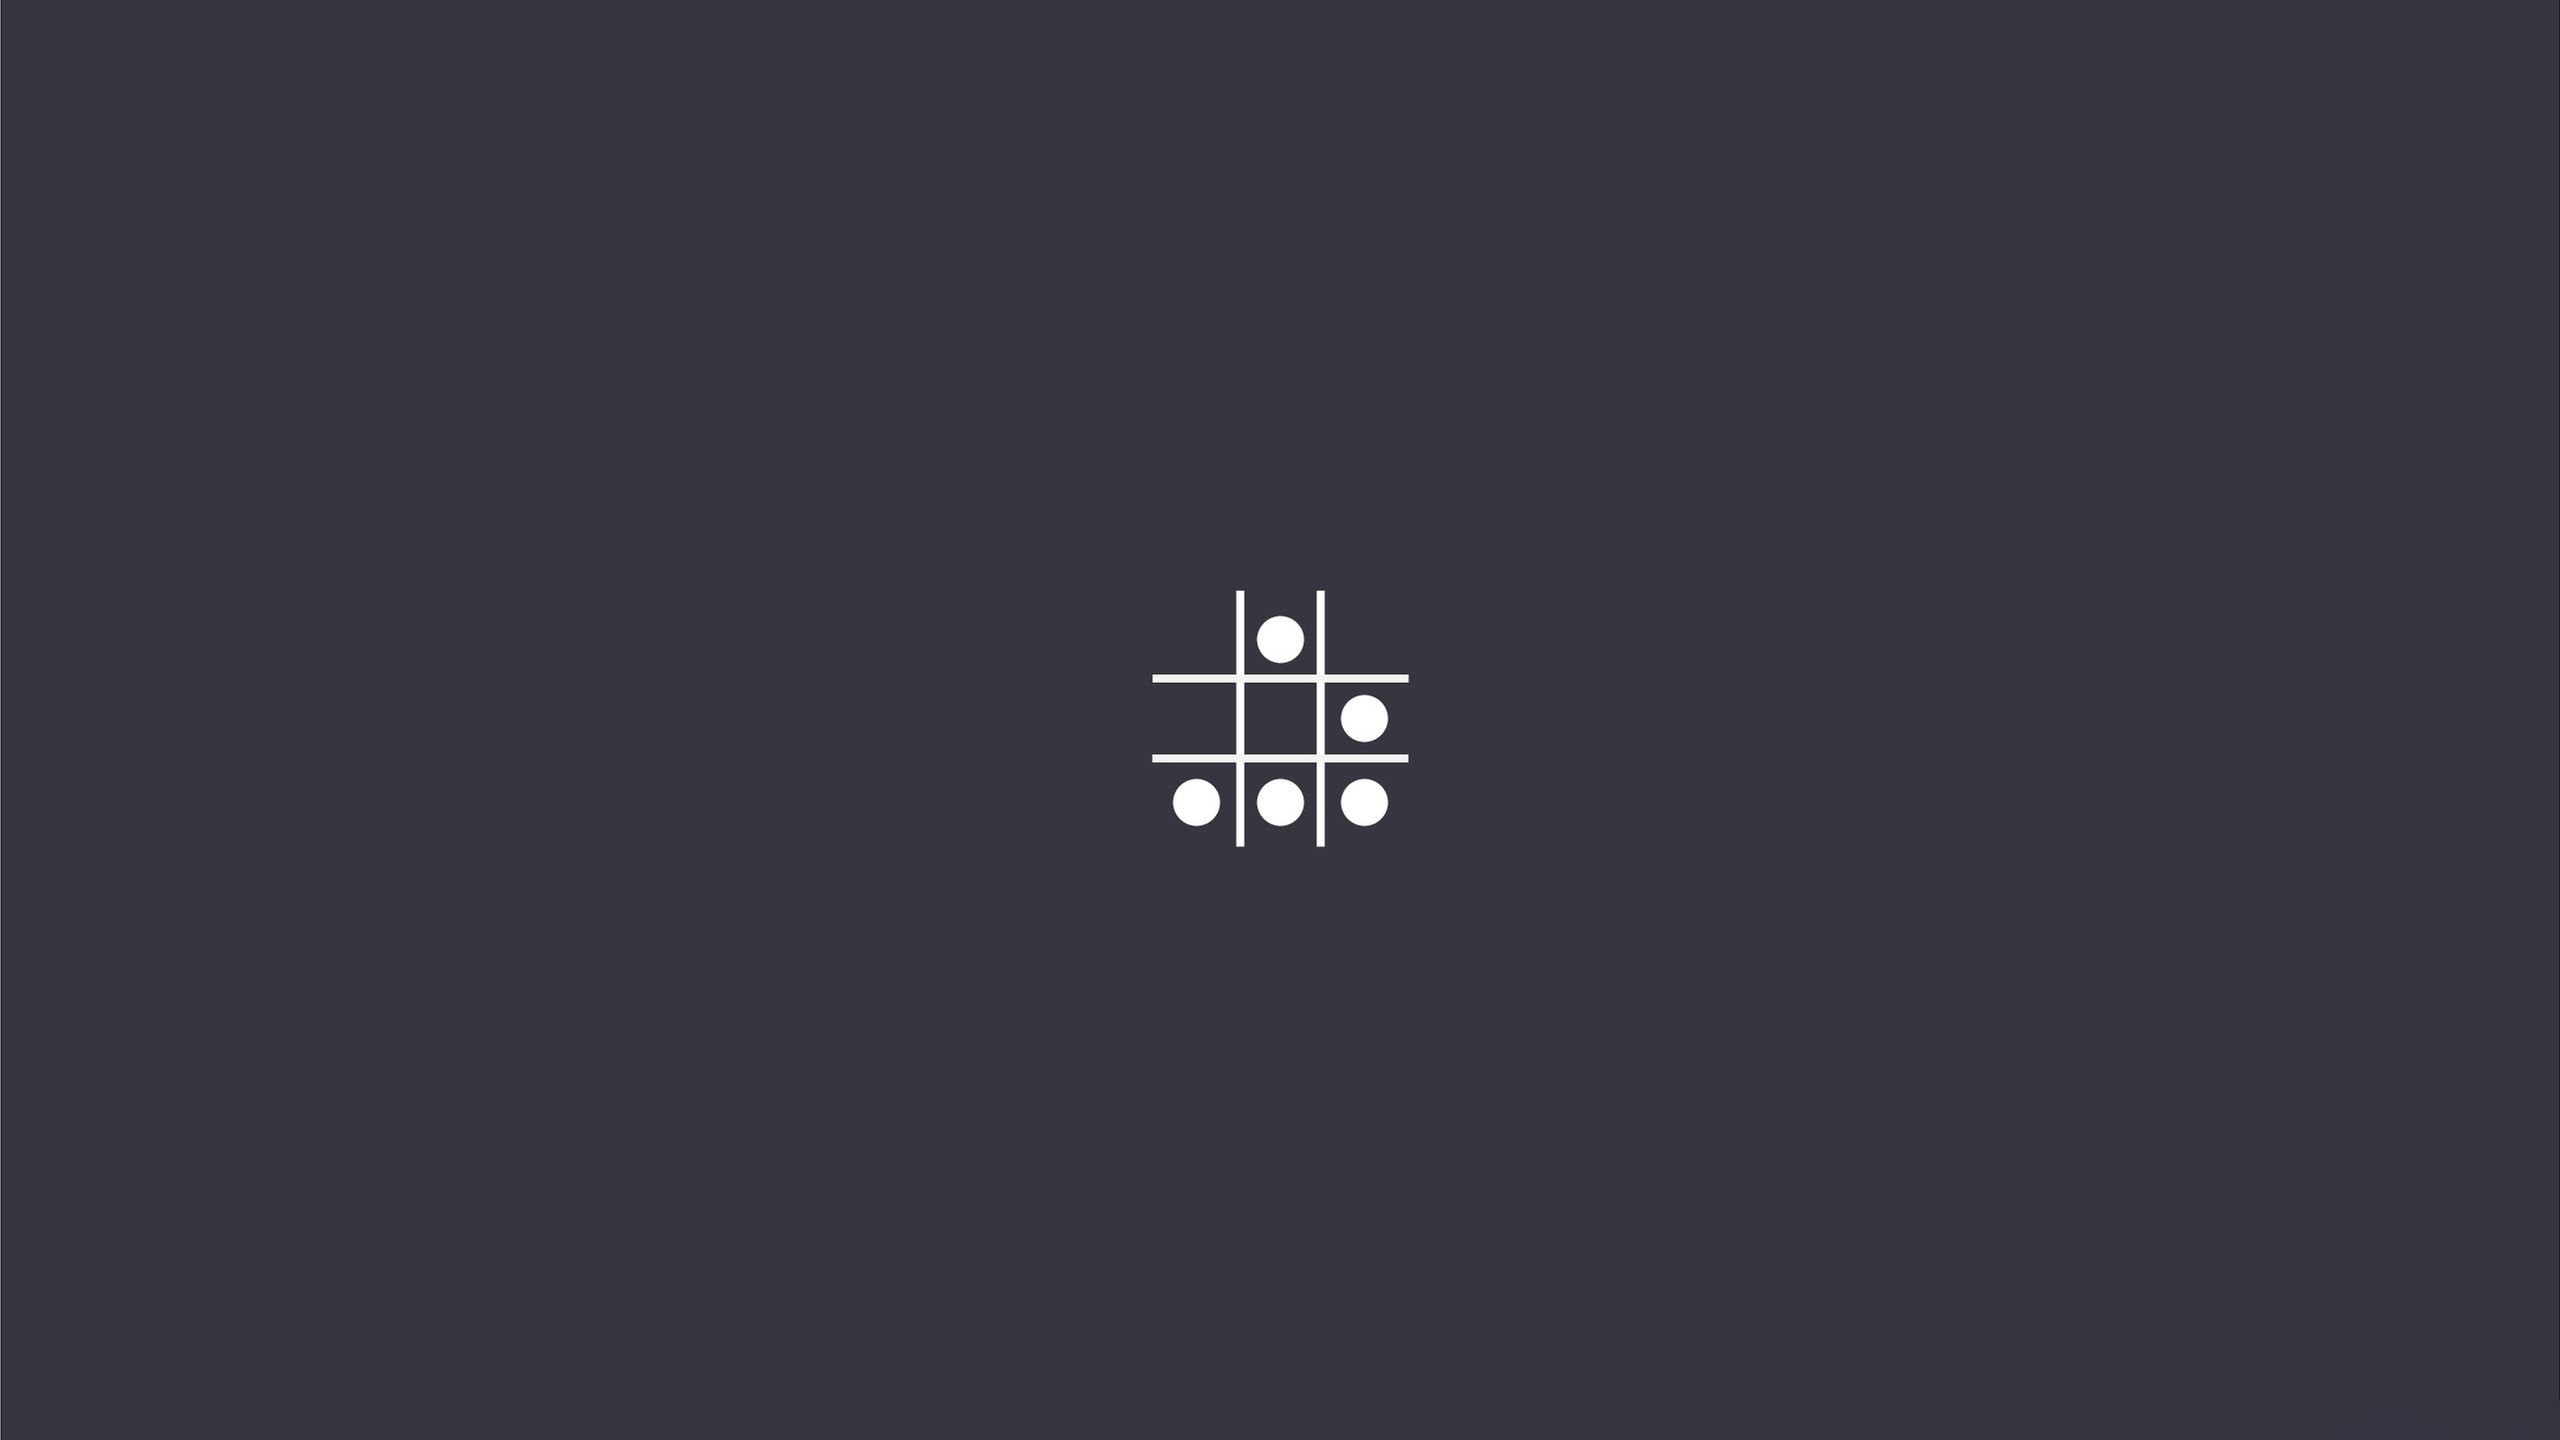 A dark gray background with a Tic Tac Toe game board - Minimalist